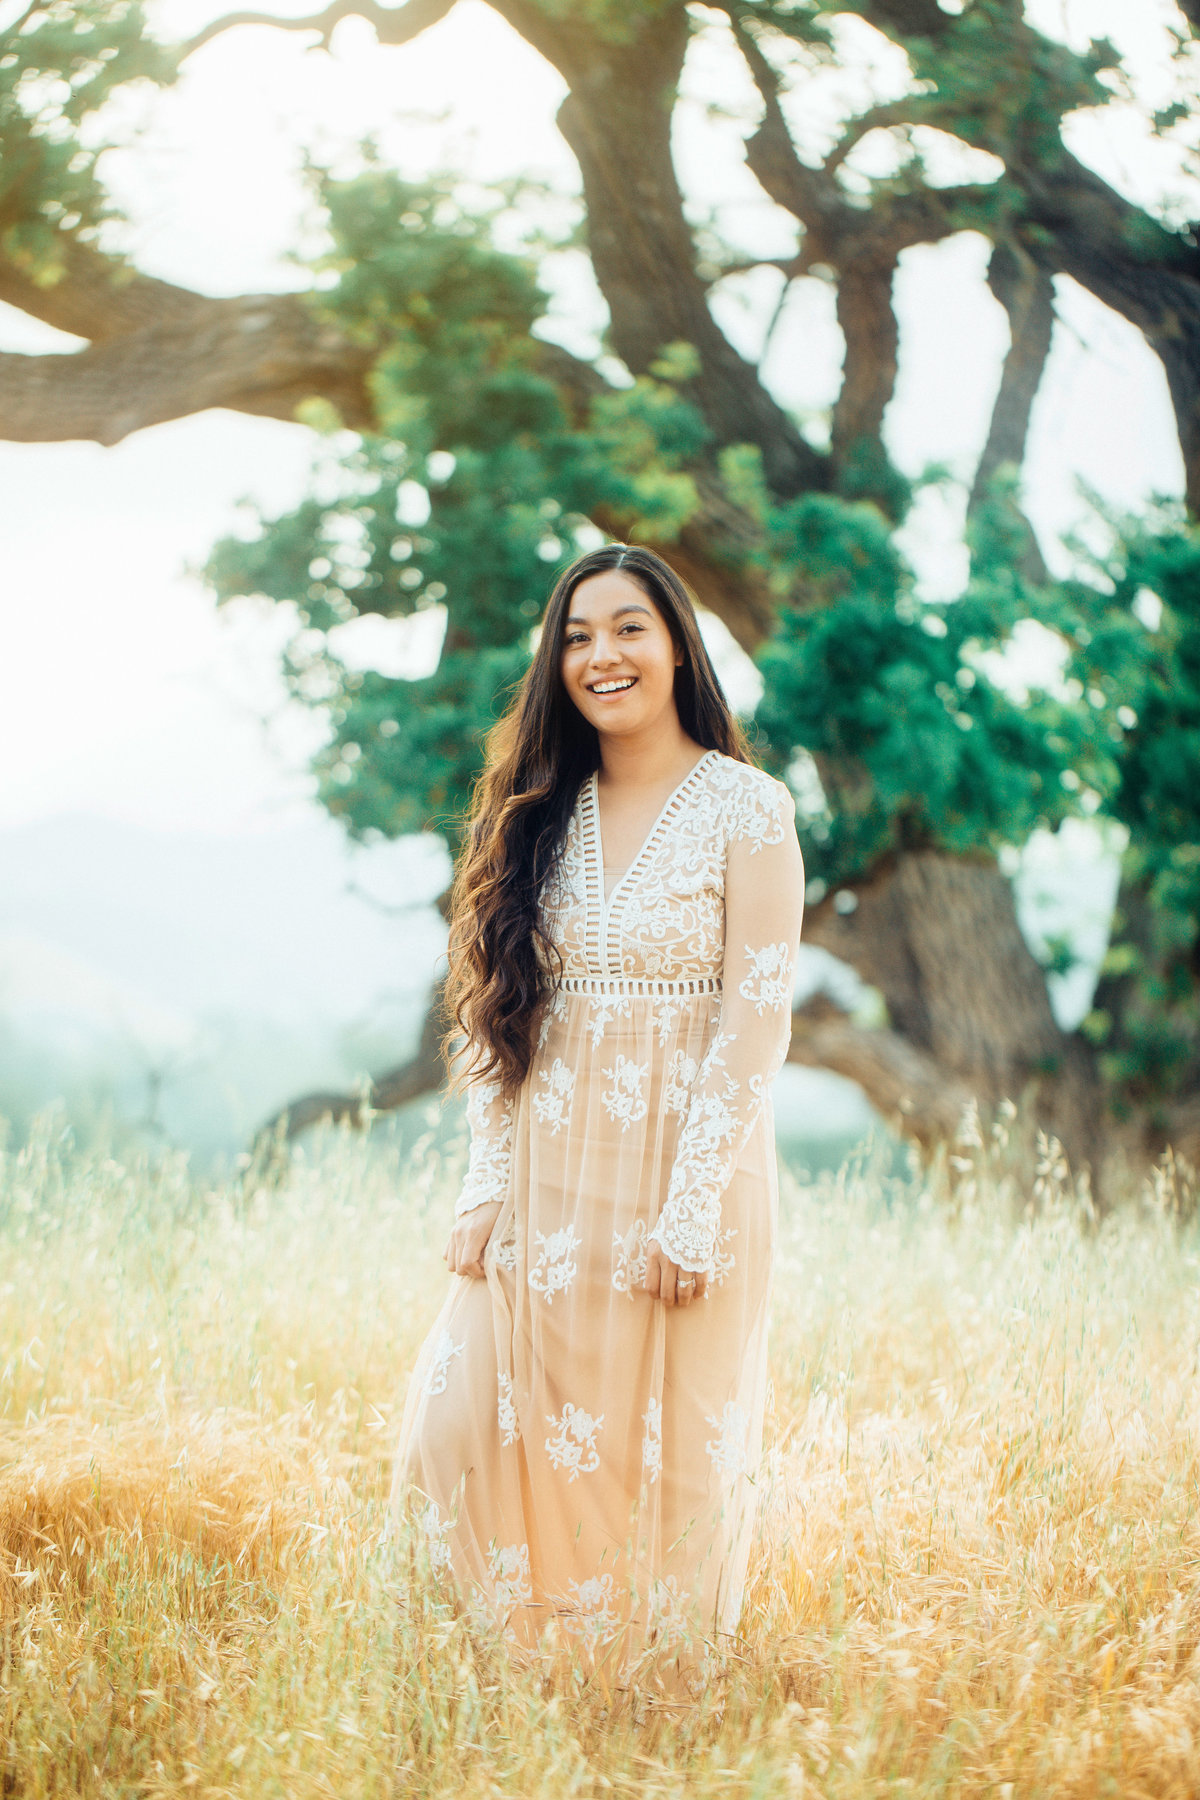 Engagement Photograph Of  Woman In Orange Dress Smiling Los Angeles